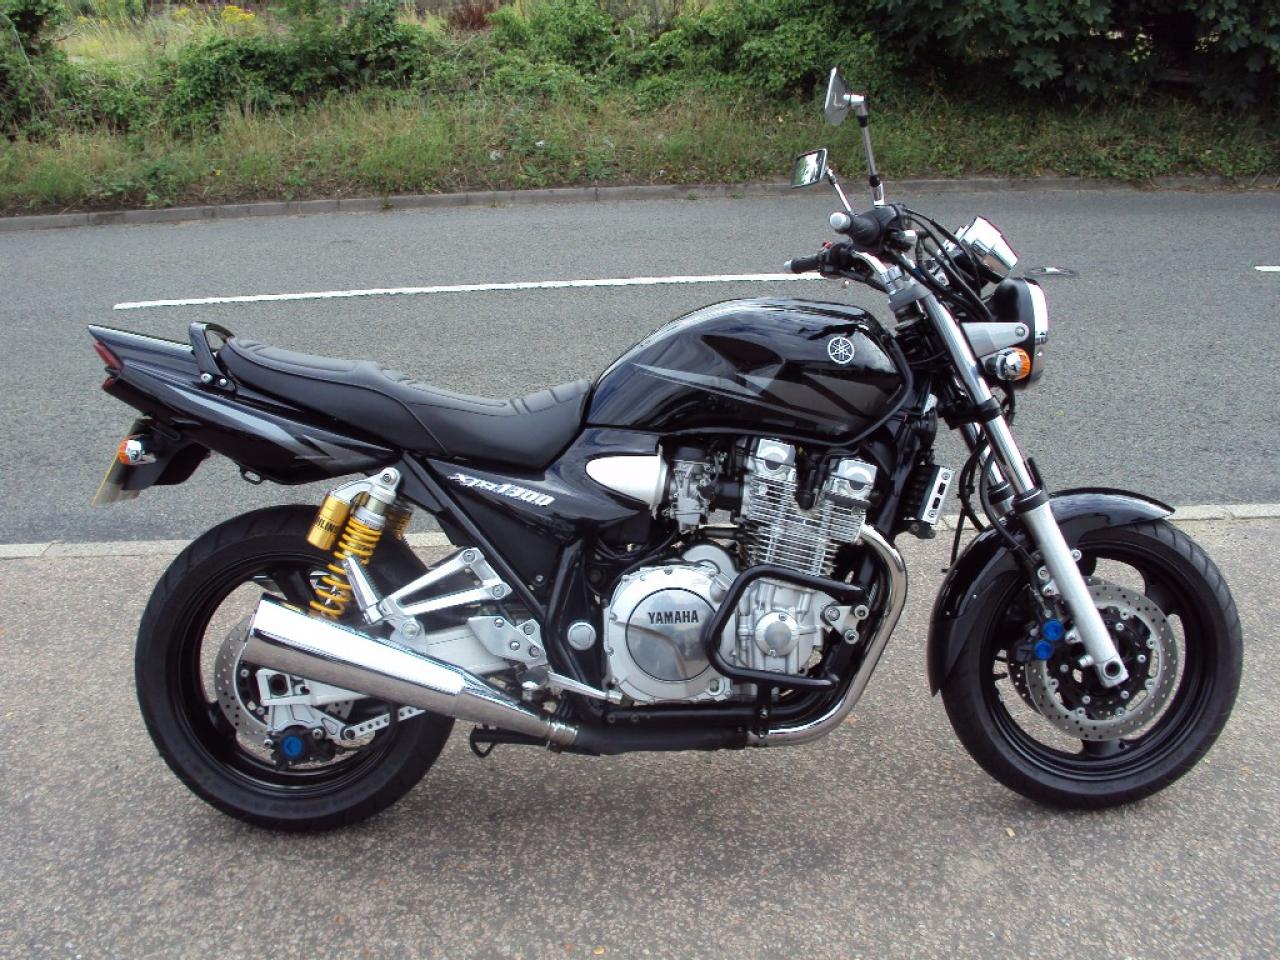 2002 Yamaha XJR 1300: pics, specs and information 